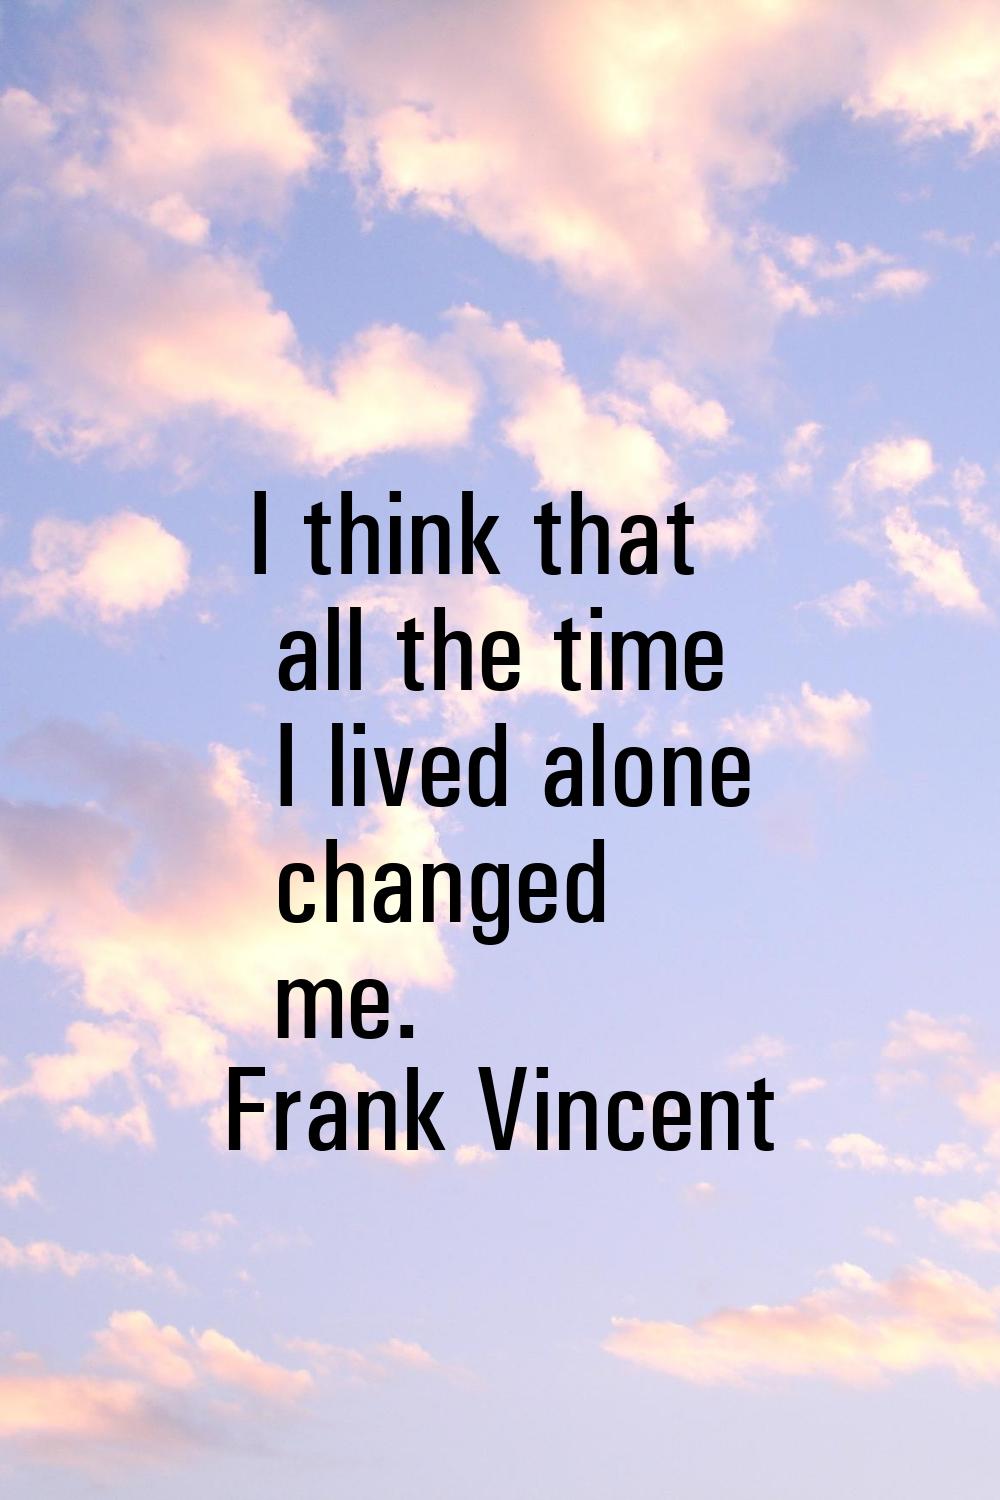 I think that all the time I lived alone changed me.